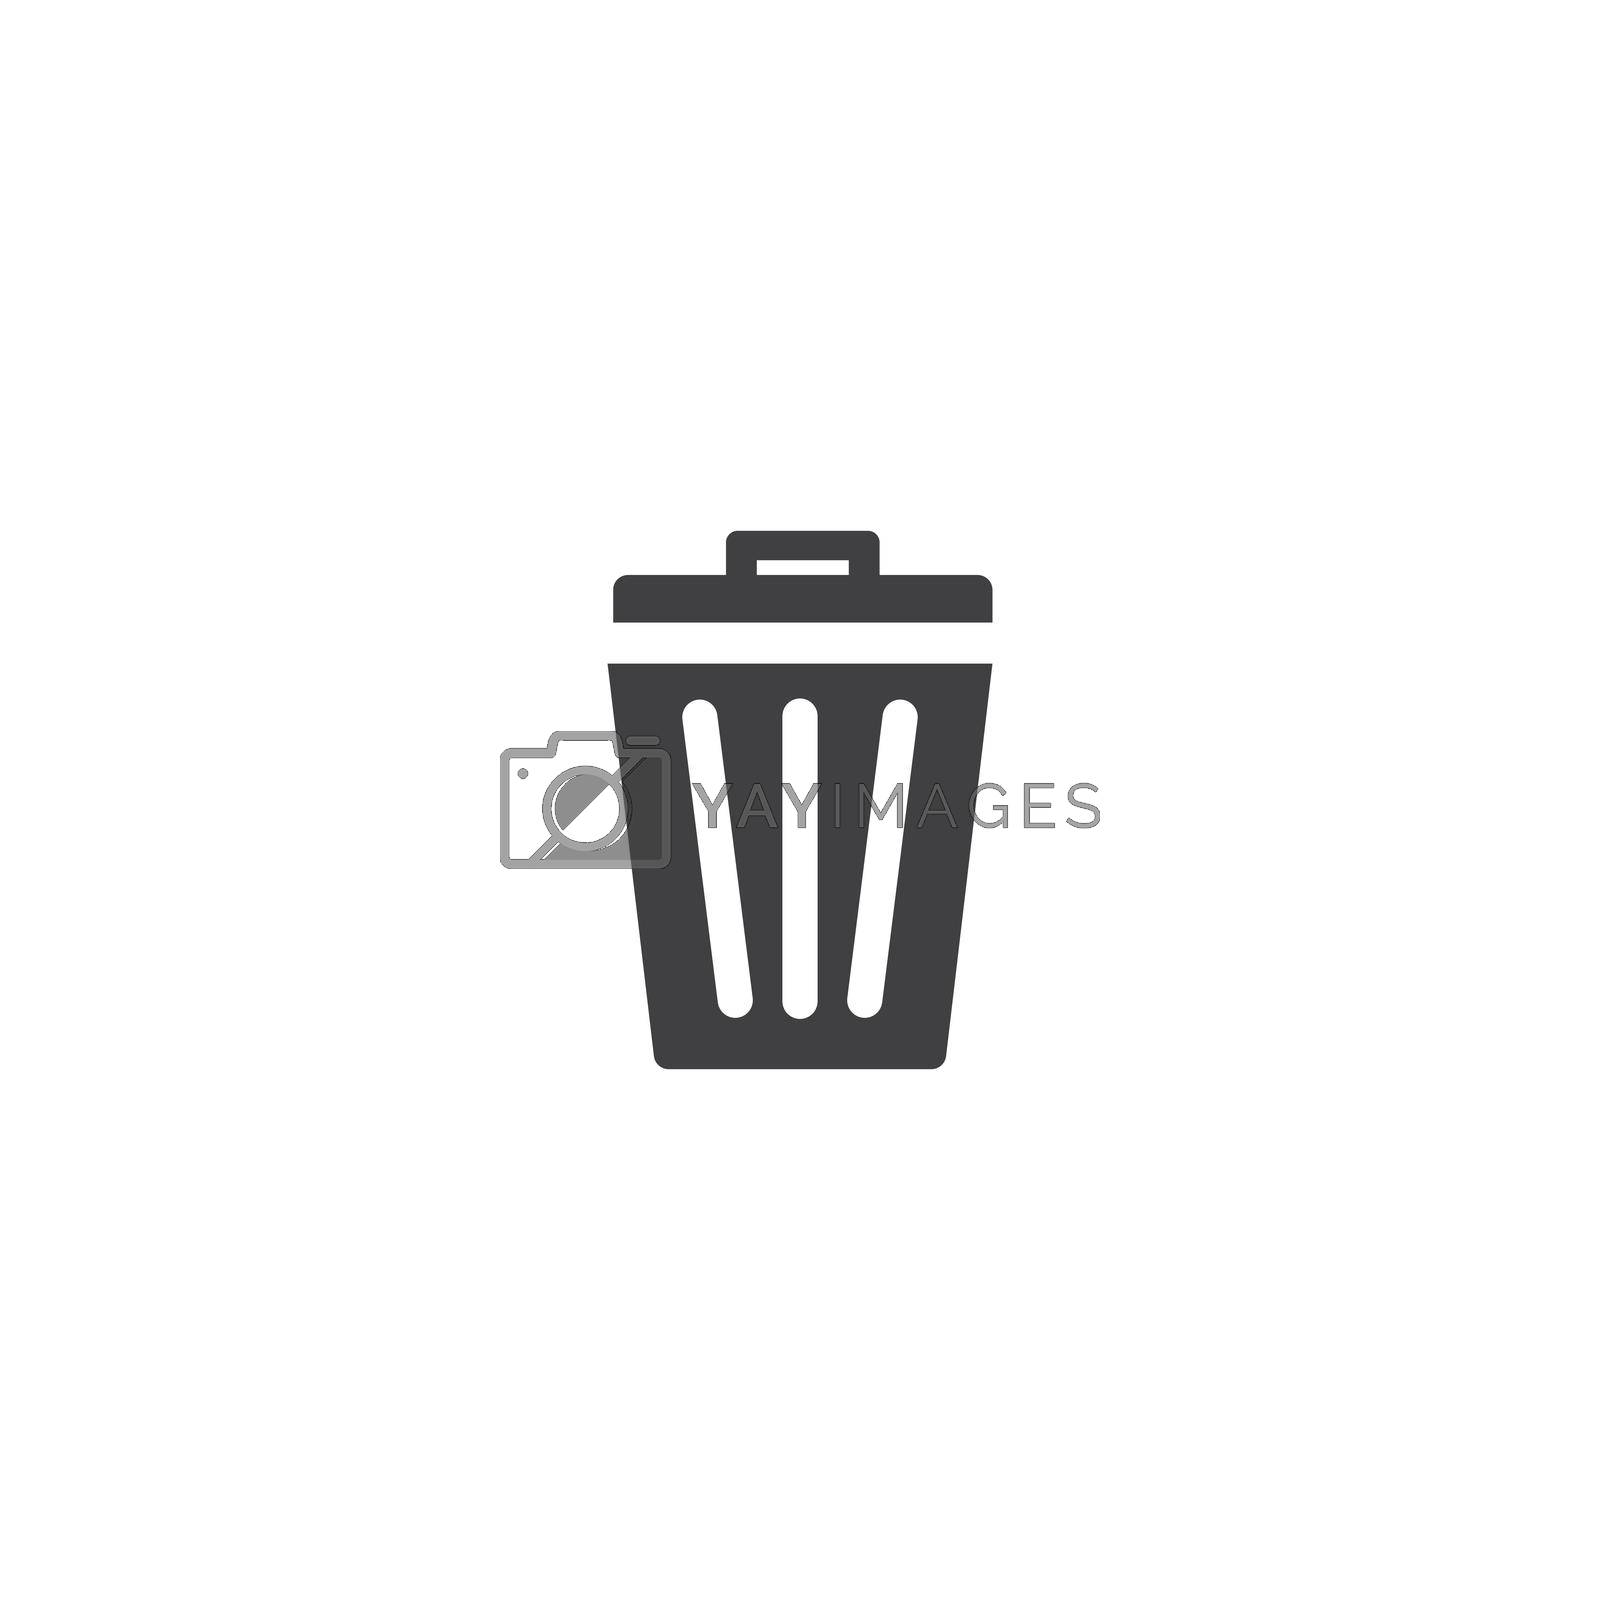 Royalty free image of Trash basket icon  by awk